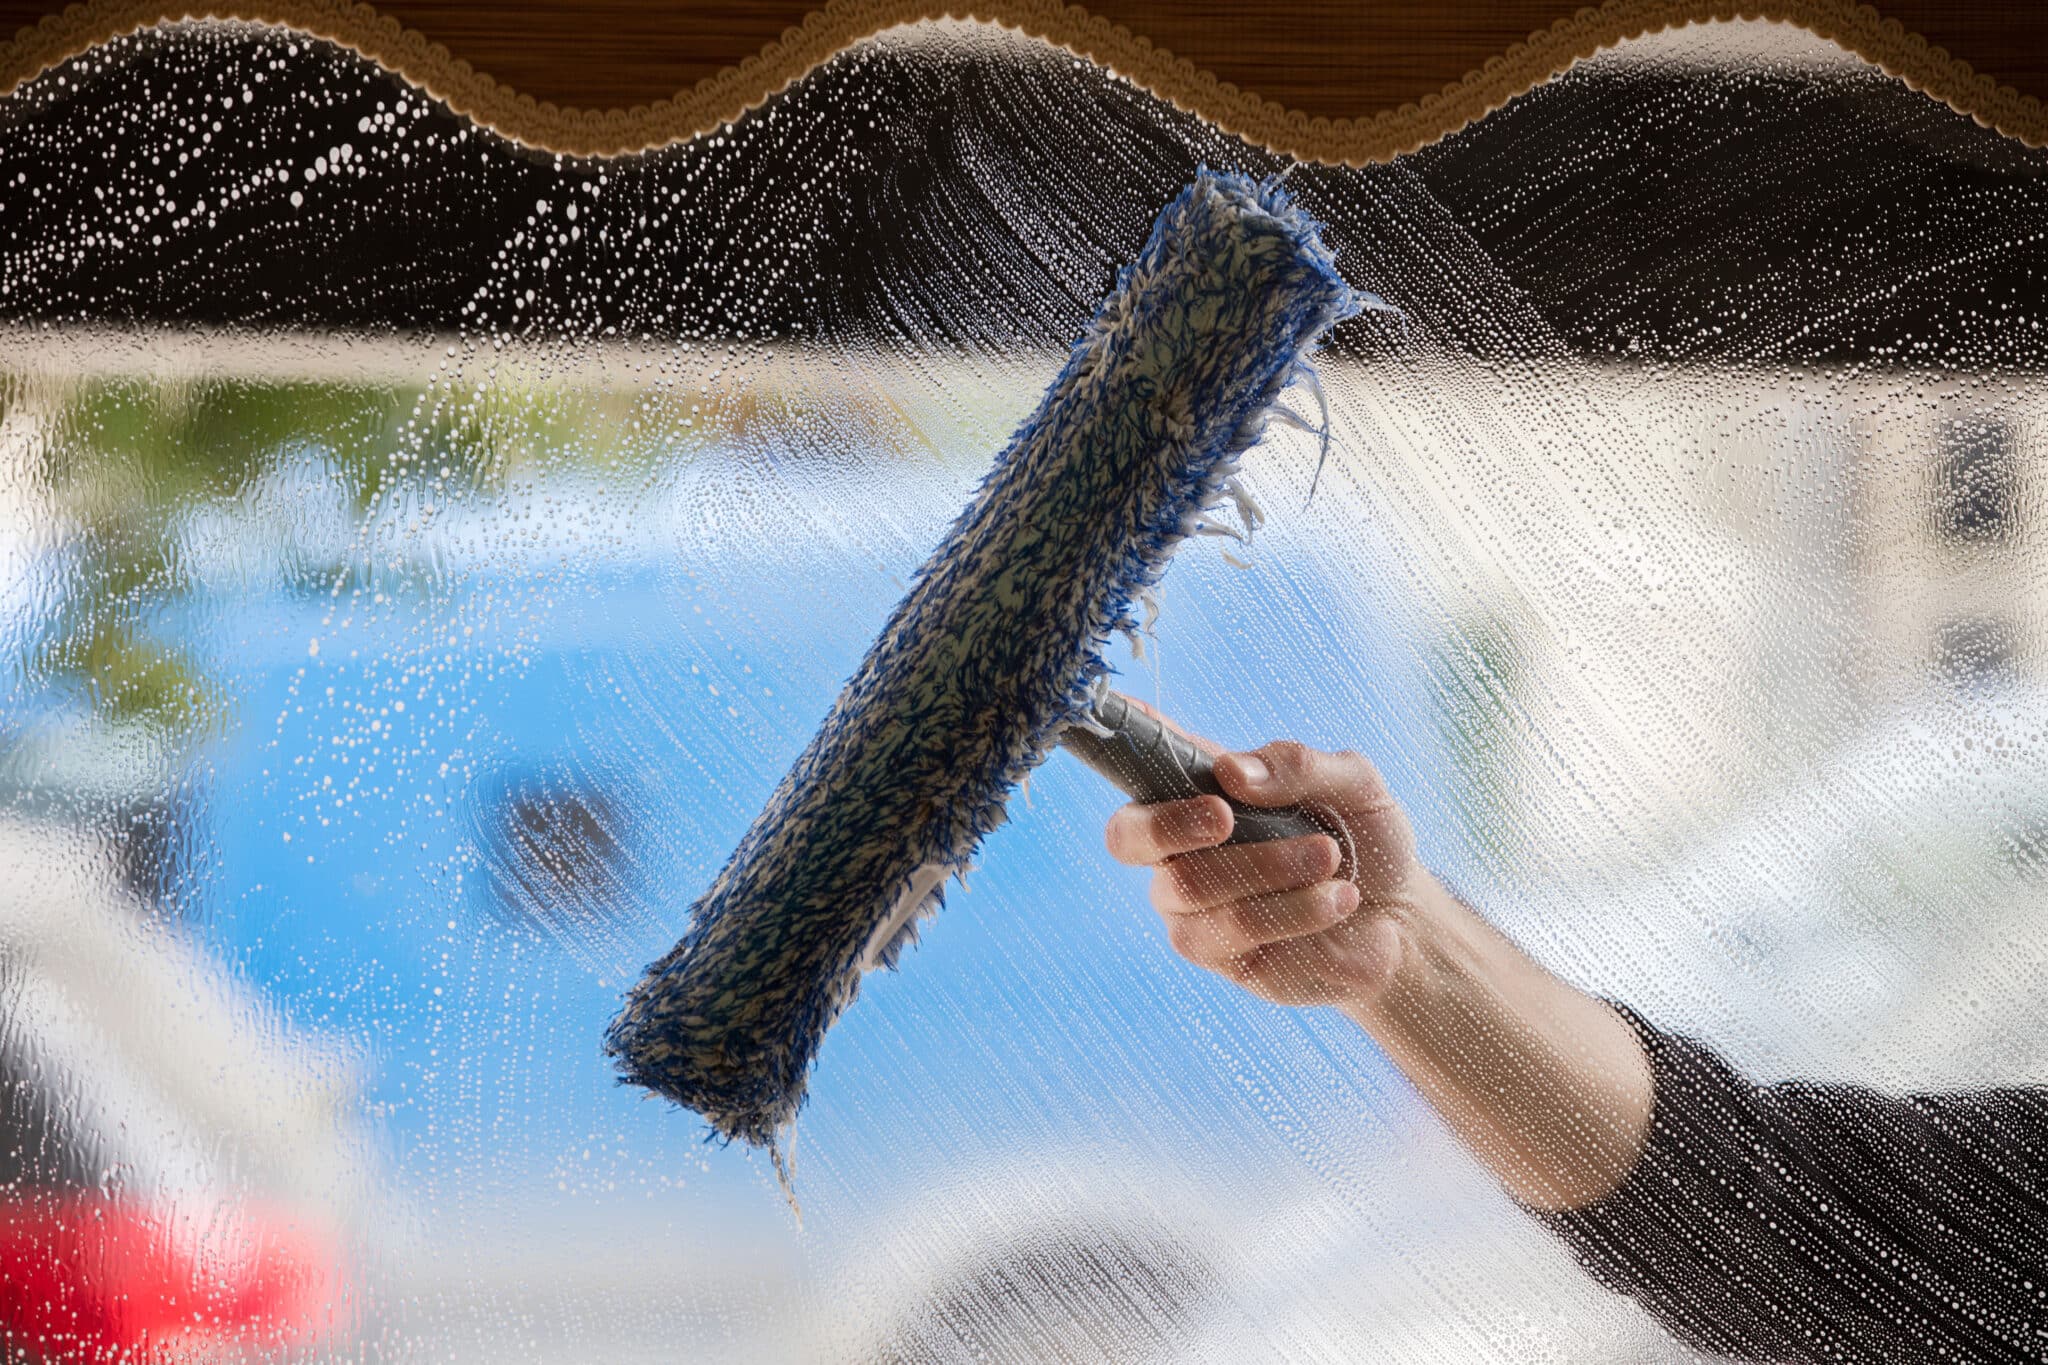 Osseo, MN Window Cleaning - Squeegee Magic